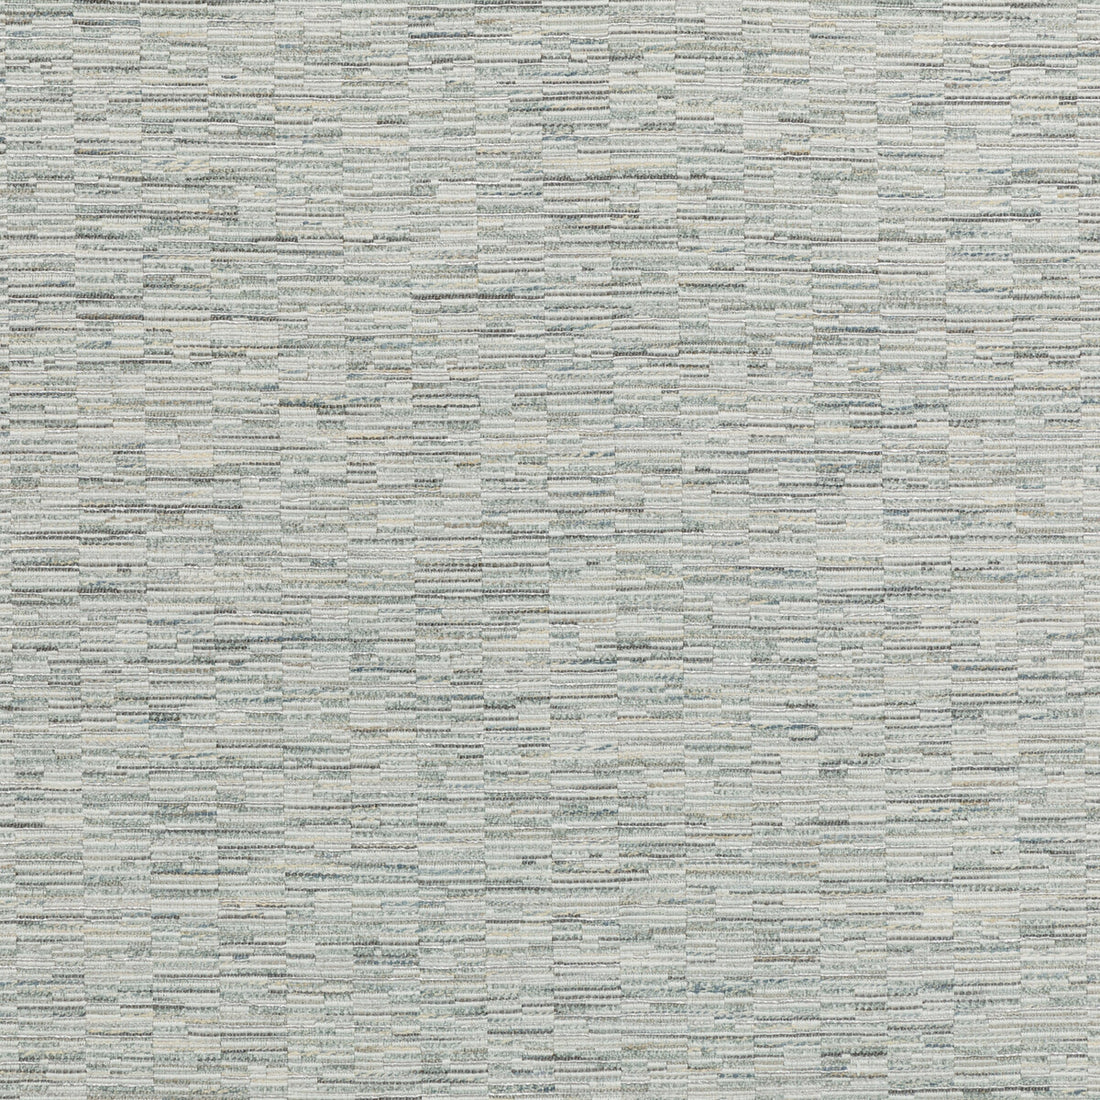 Kravet Couture fabric in 37029-1101 color - pattern 37029.1101.0 - by Kravet Couture in the Mabley Handler collection